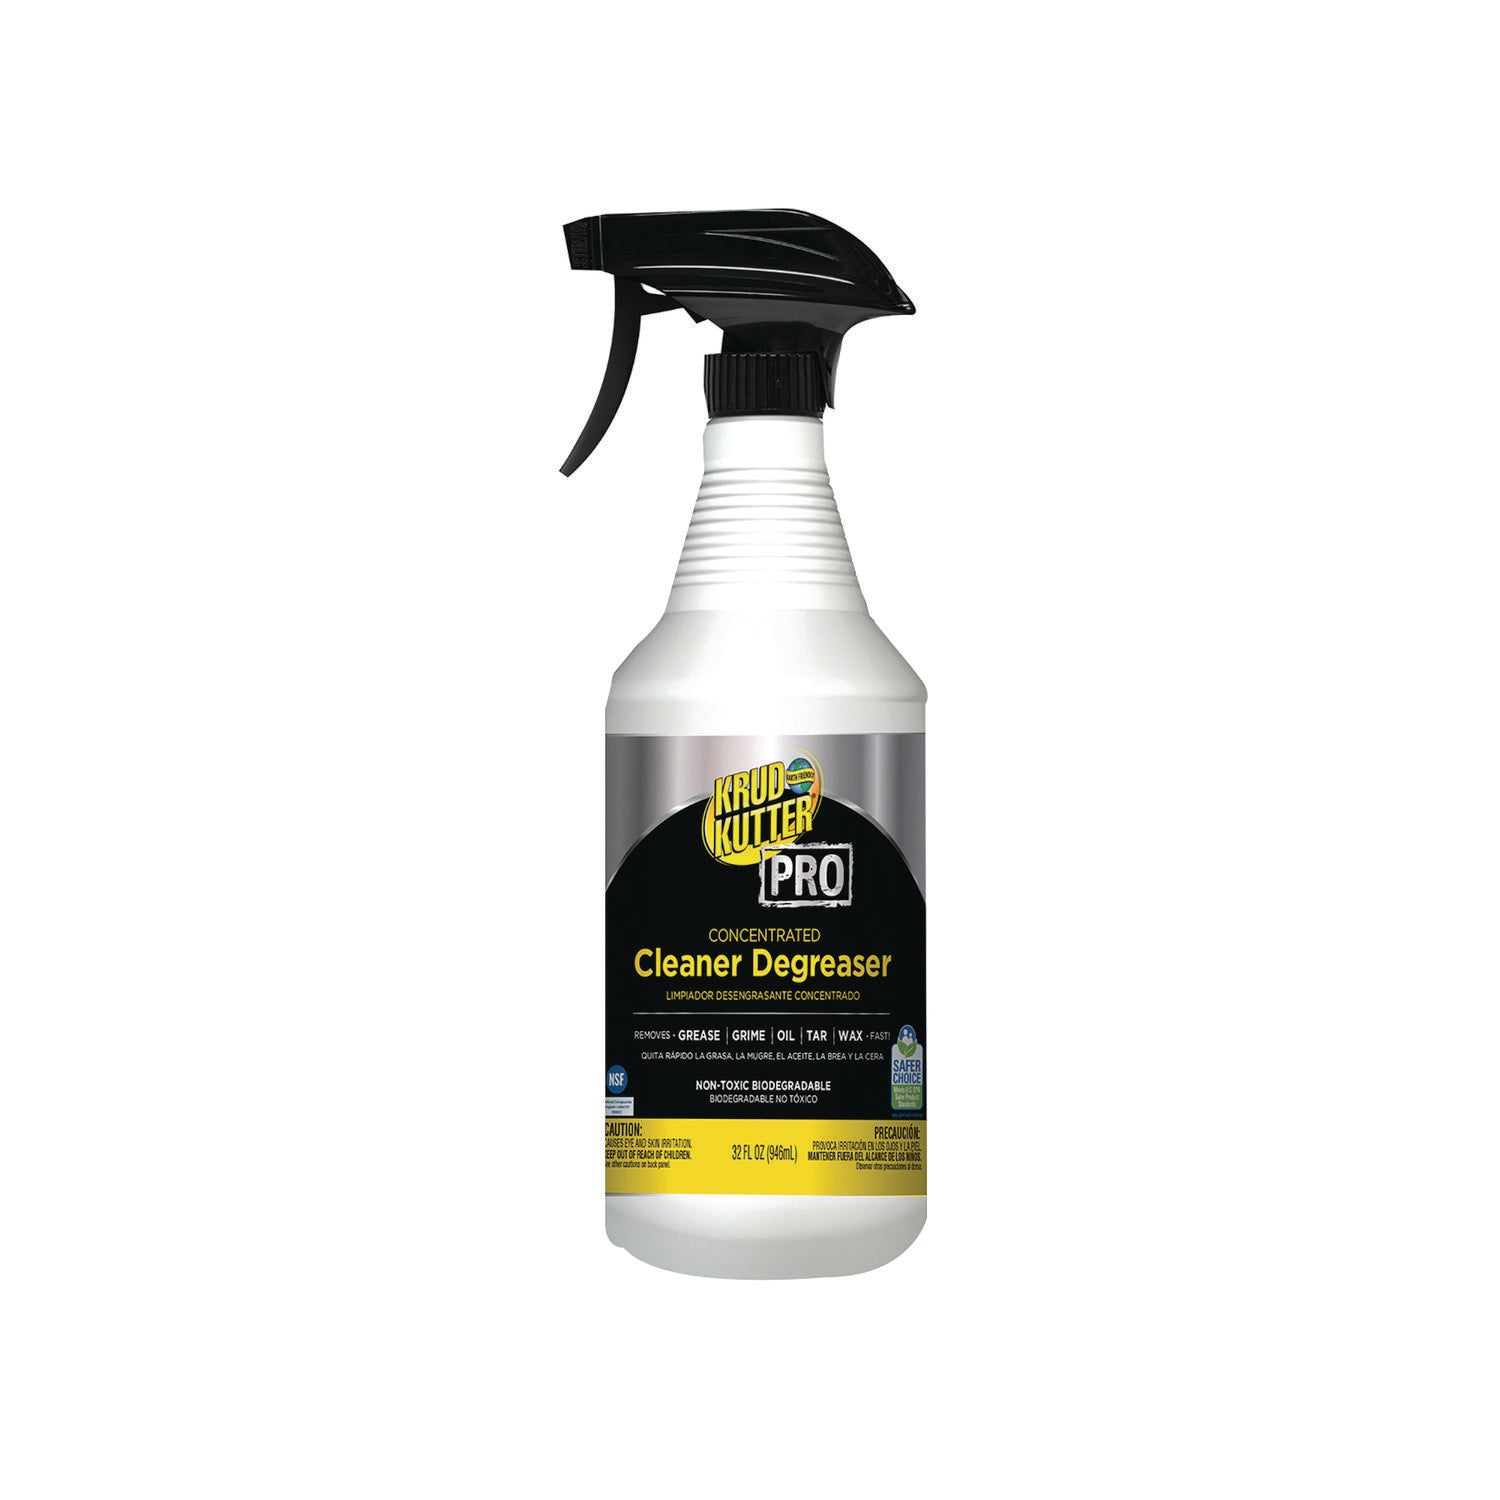 Krud Kutter Pro Cleaner Degreaser - Concentrate - 32 oz (2 lb) - 1 Each - Heavy Duty, Chemical-free, Residue-free - Clear - 1